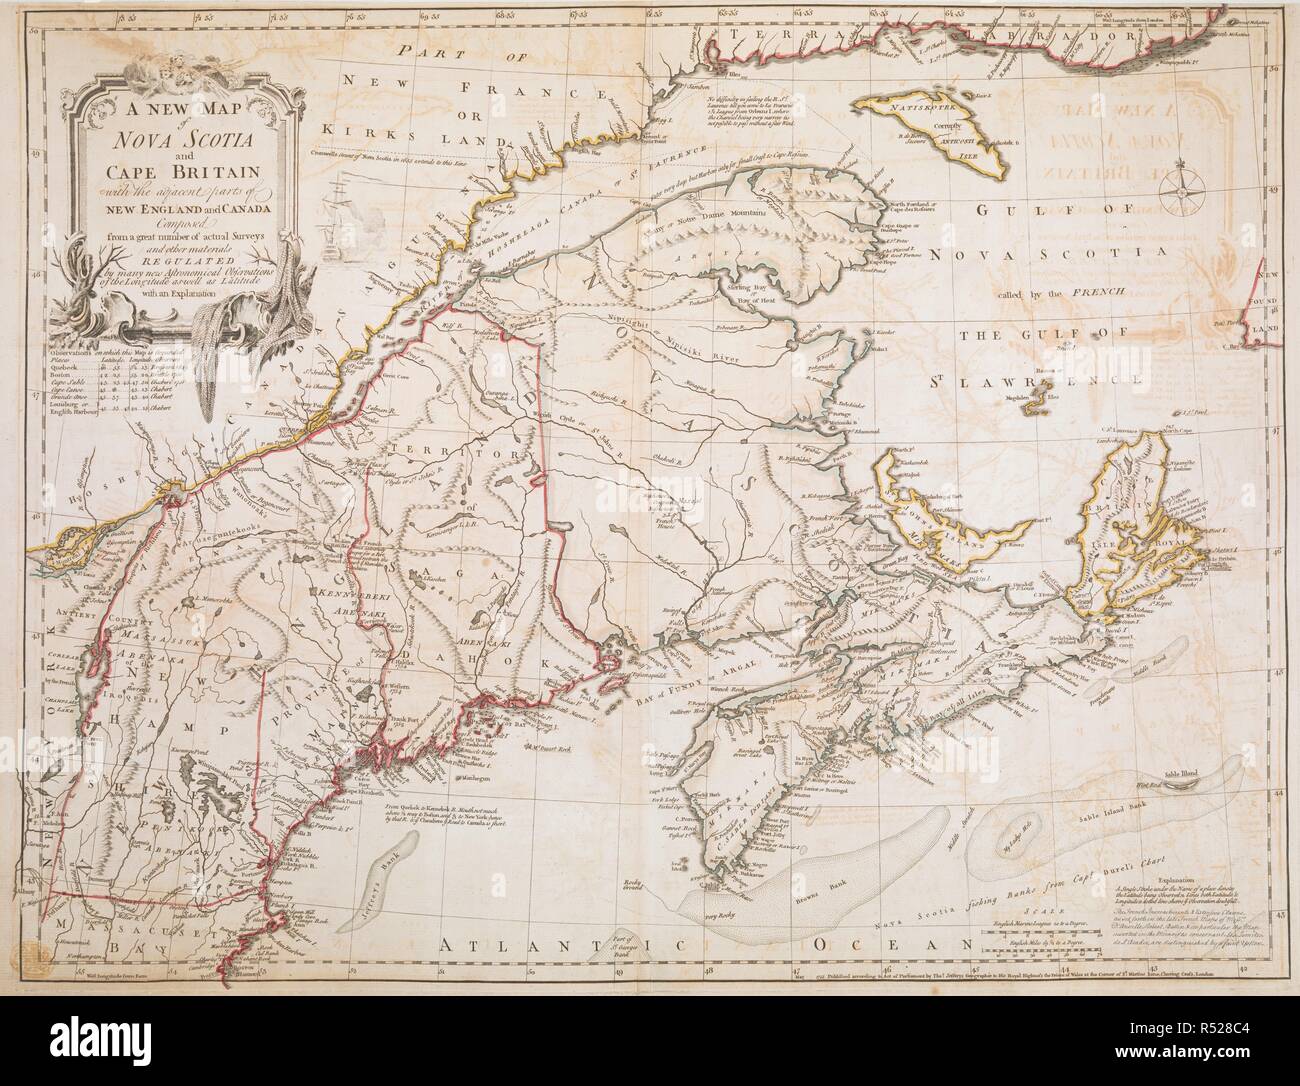 A map of Nova Scotia and Cape Breton. Geographical detail extends from Cape Breton in the east down the Saint Lawrence River as far as MontrÃ©al, and from the coast of Labrador in the north to Boston Harbour in the south. A NEW MAP of NOVA SCOTIA and CAPE BRITAIN with the adjacent parts of NEW ENGLAND and CANADA : Composed from a great number of actual Surveys and other materials REGULATED by many new Astronomical Observations of the Longitude as well as Latitude with an Explanation. [London] : May 1755 Published according to Act of Parliament by Thos. Jefferys Geographer to His Royal Highness Stock Photo